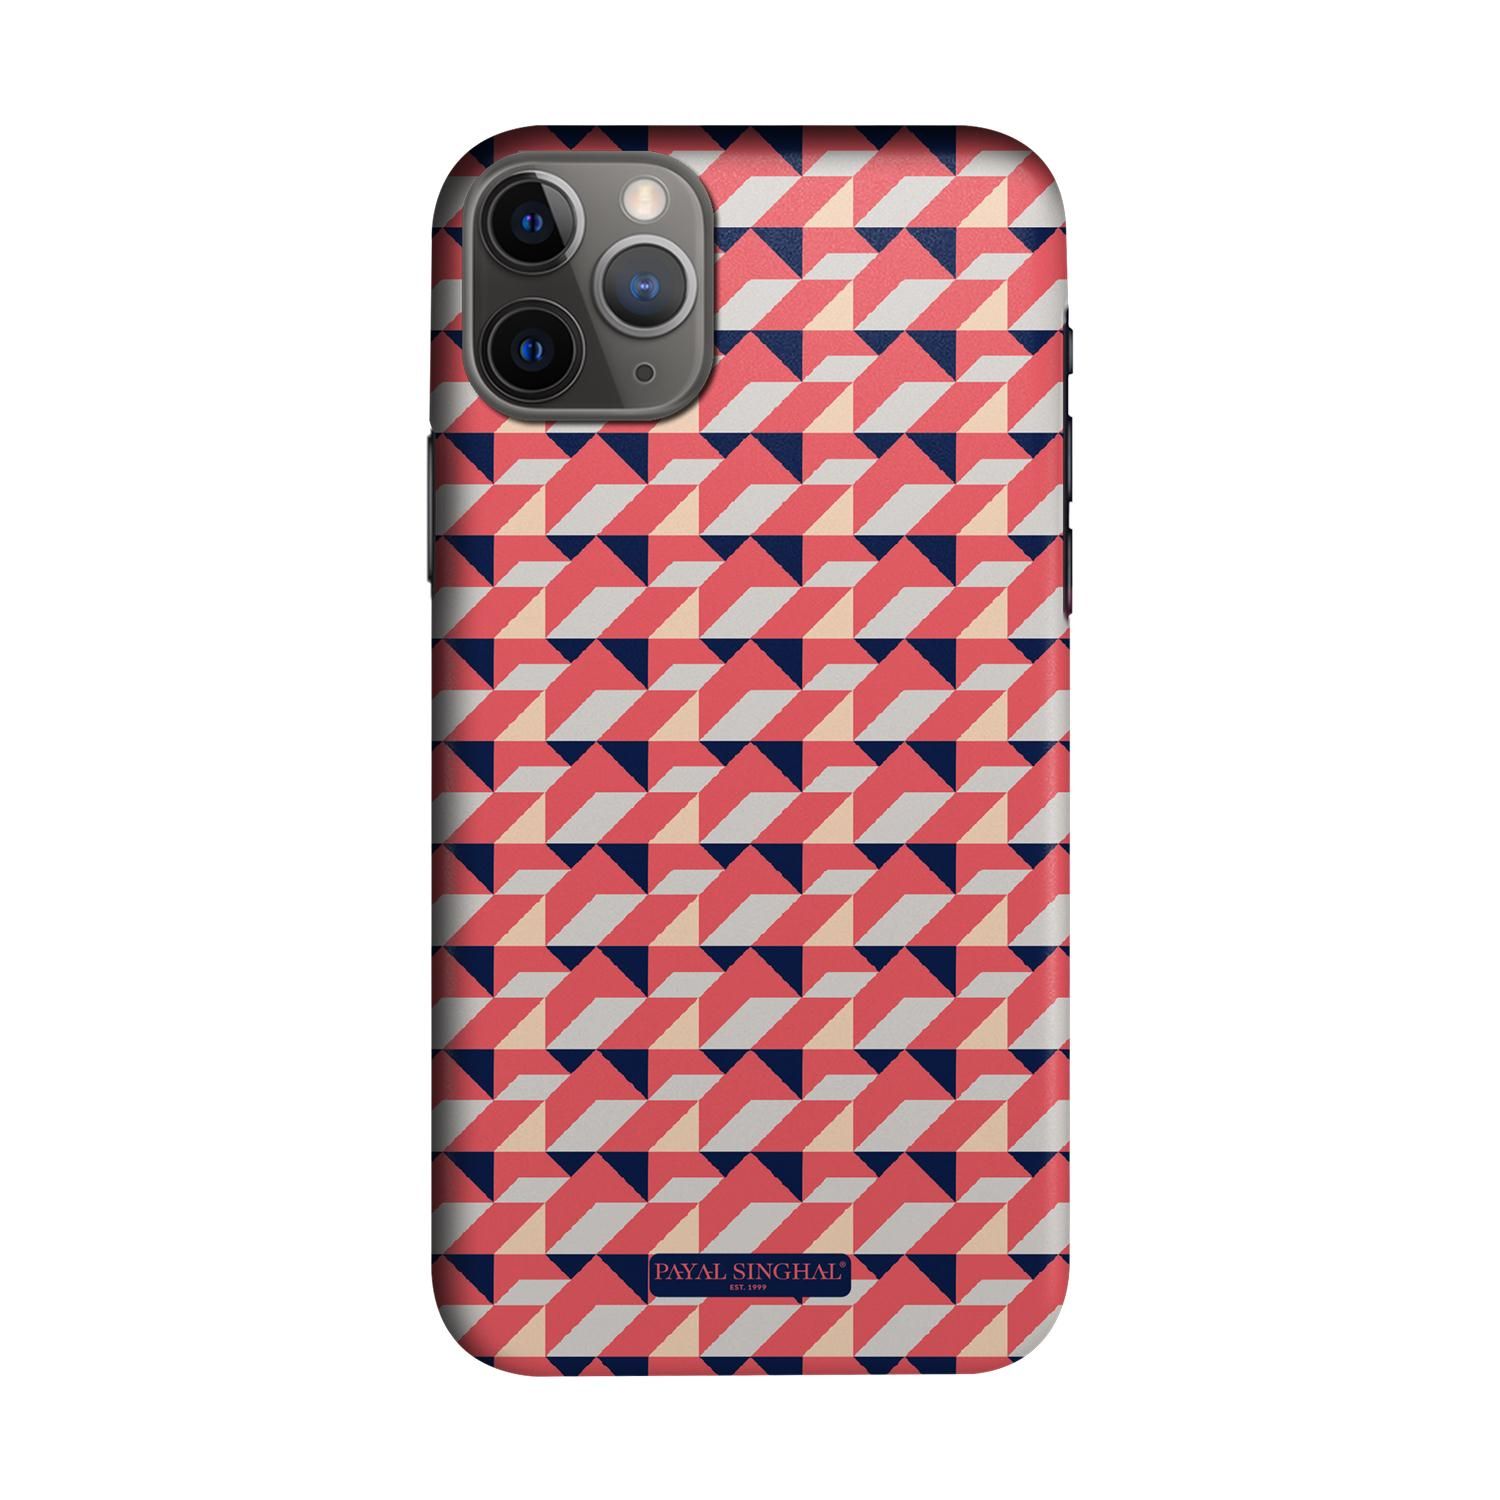 Payal Singhal Coral Navy - Sleek Phone Case for iPhone 11 Pro Max